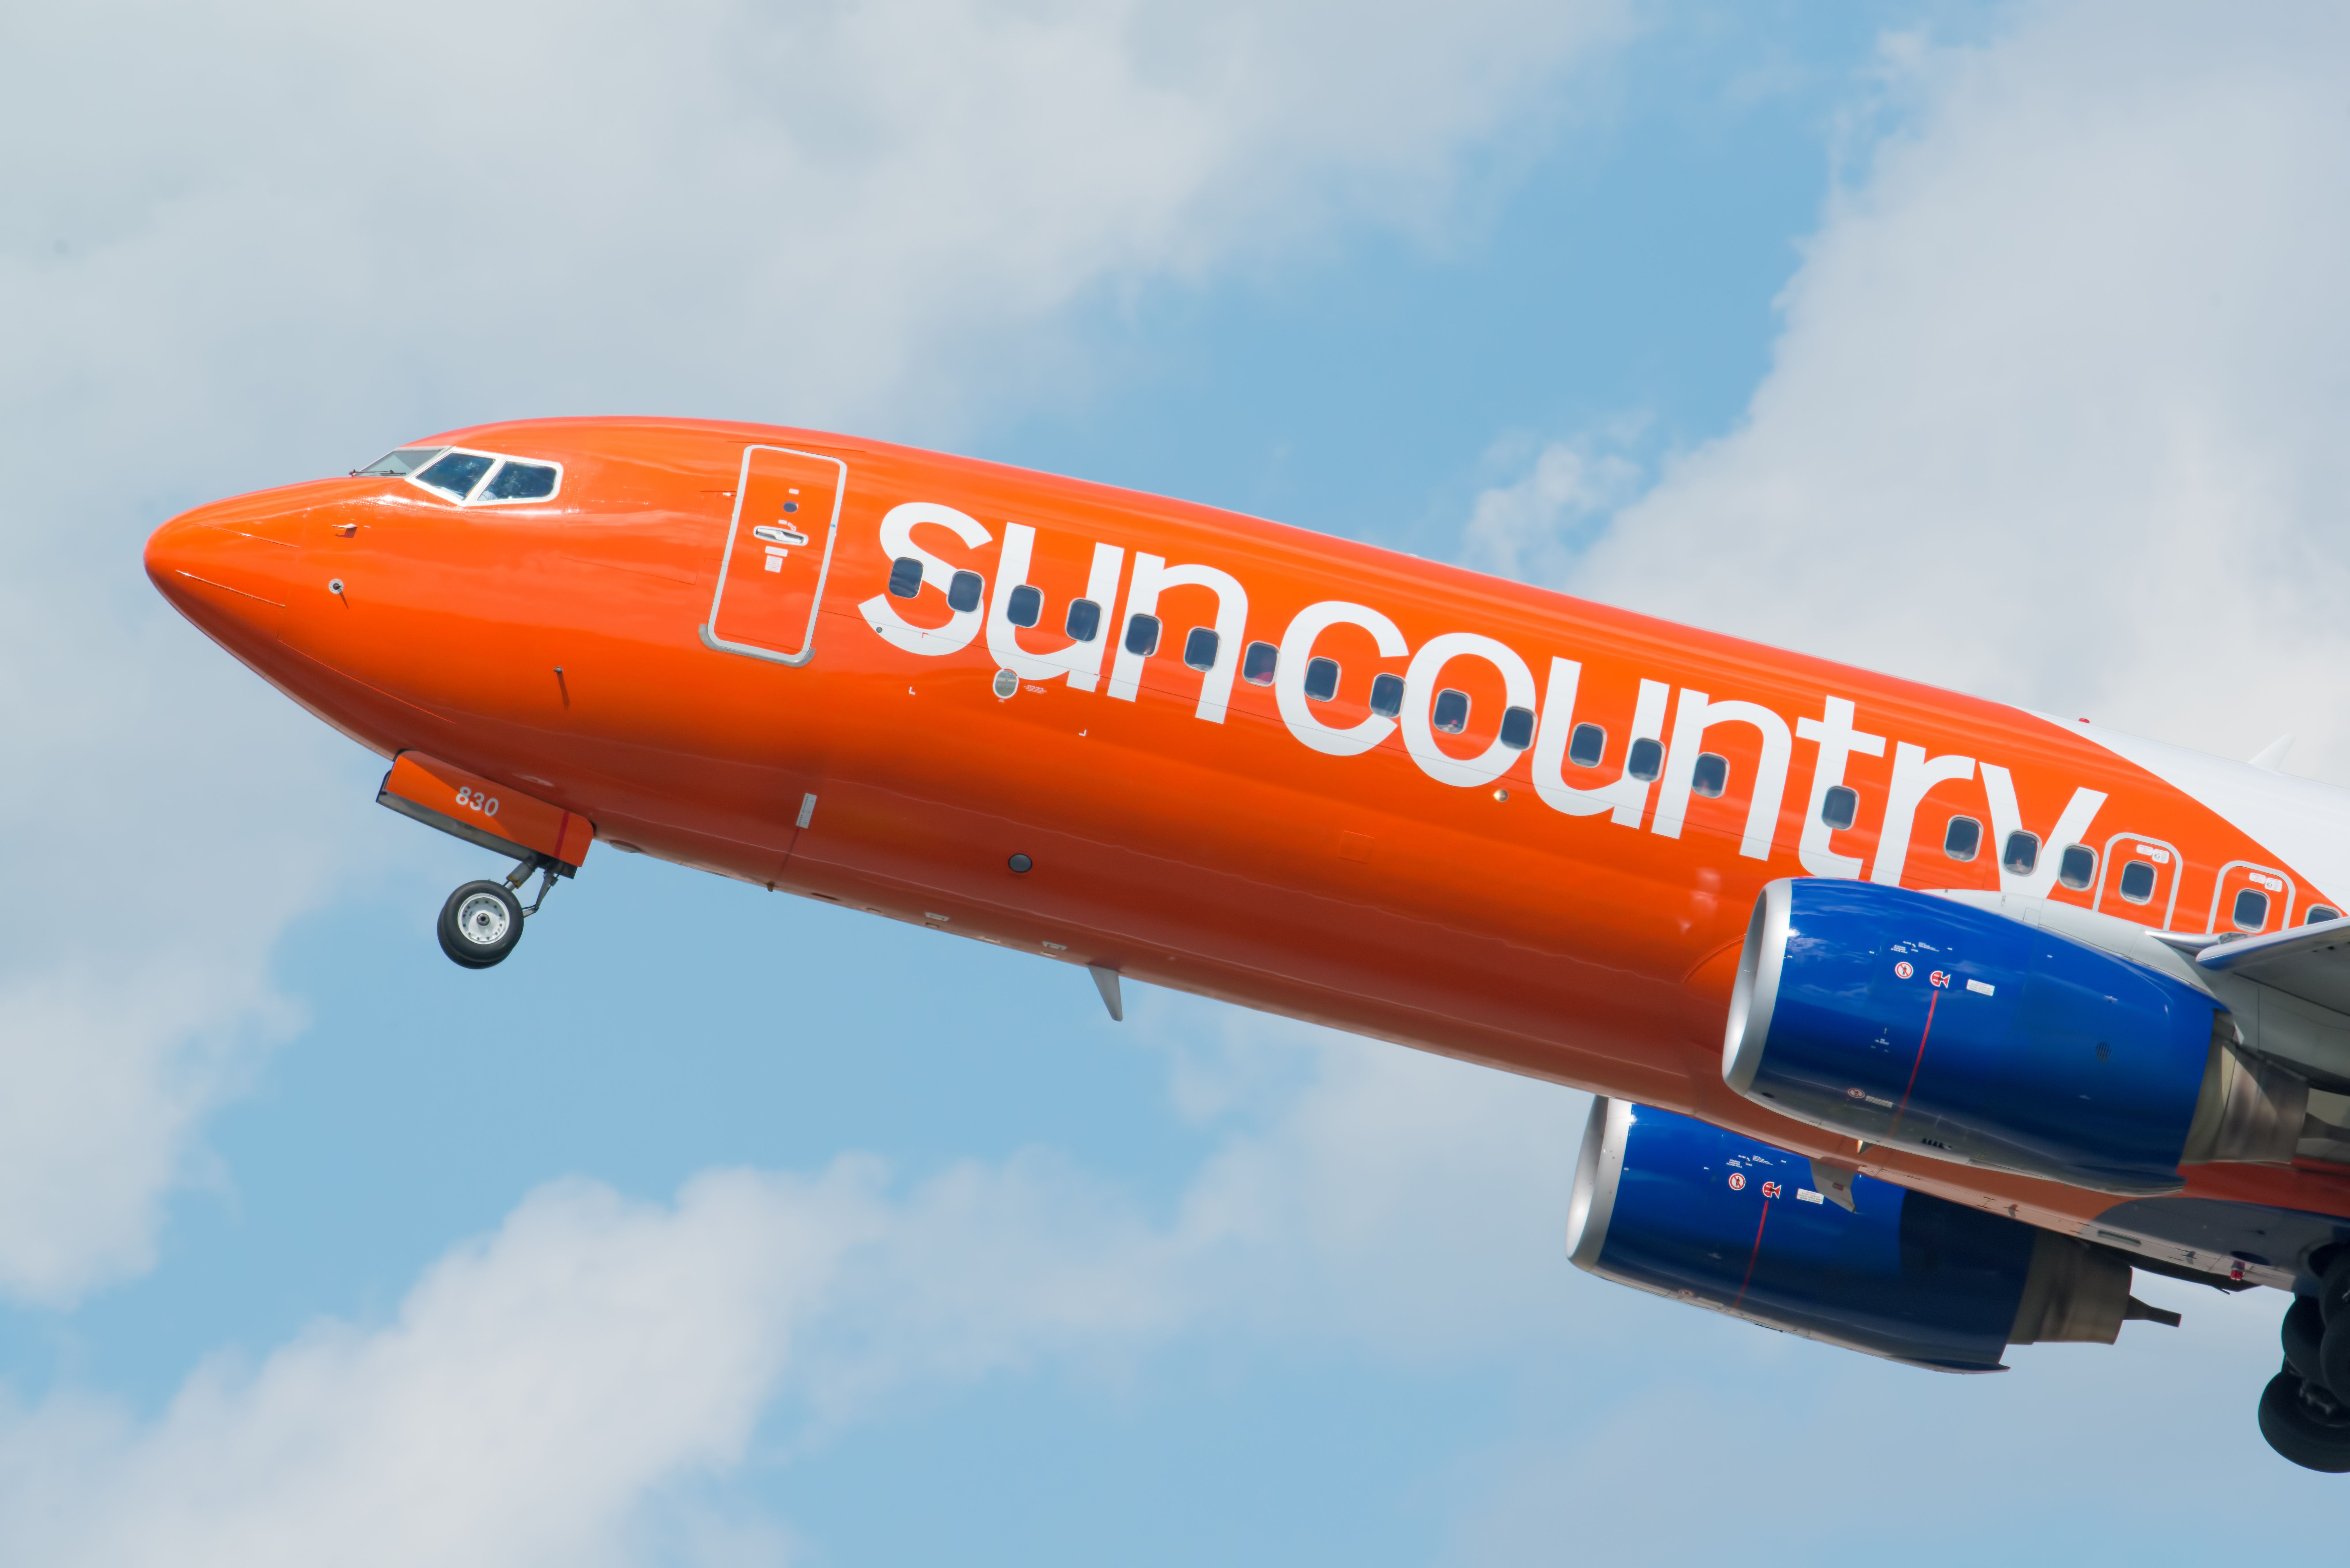 A Sun Country Airlines aircraft flying 